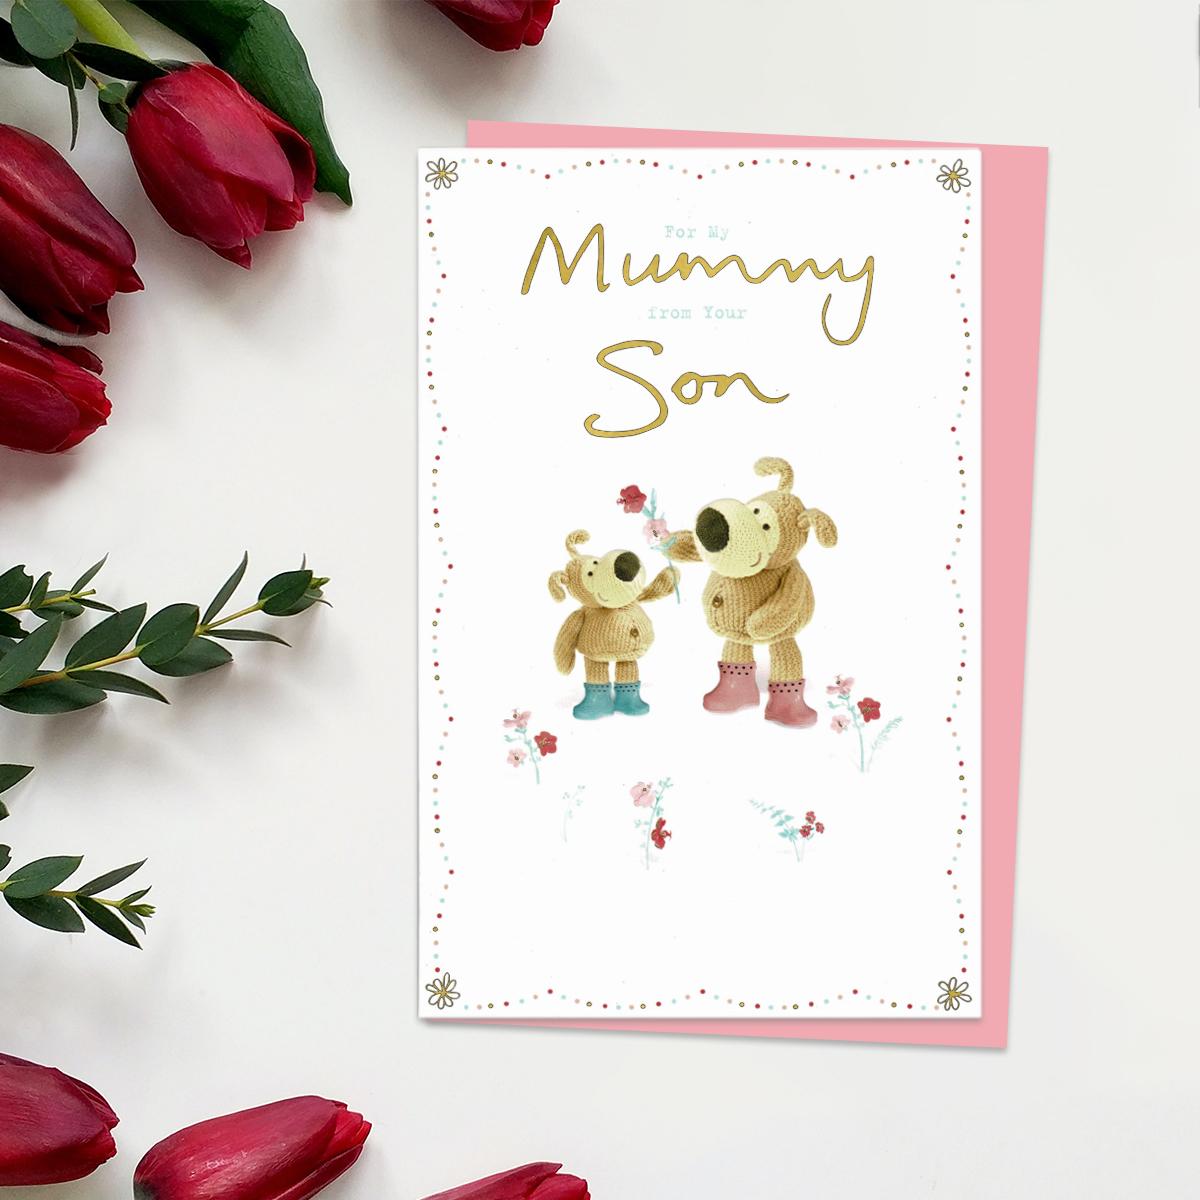 ' For My Mummy From Your Son' Mother's Day Card Showing Boofle Bear Holding Out A Flower To A Smaller Bear!